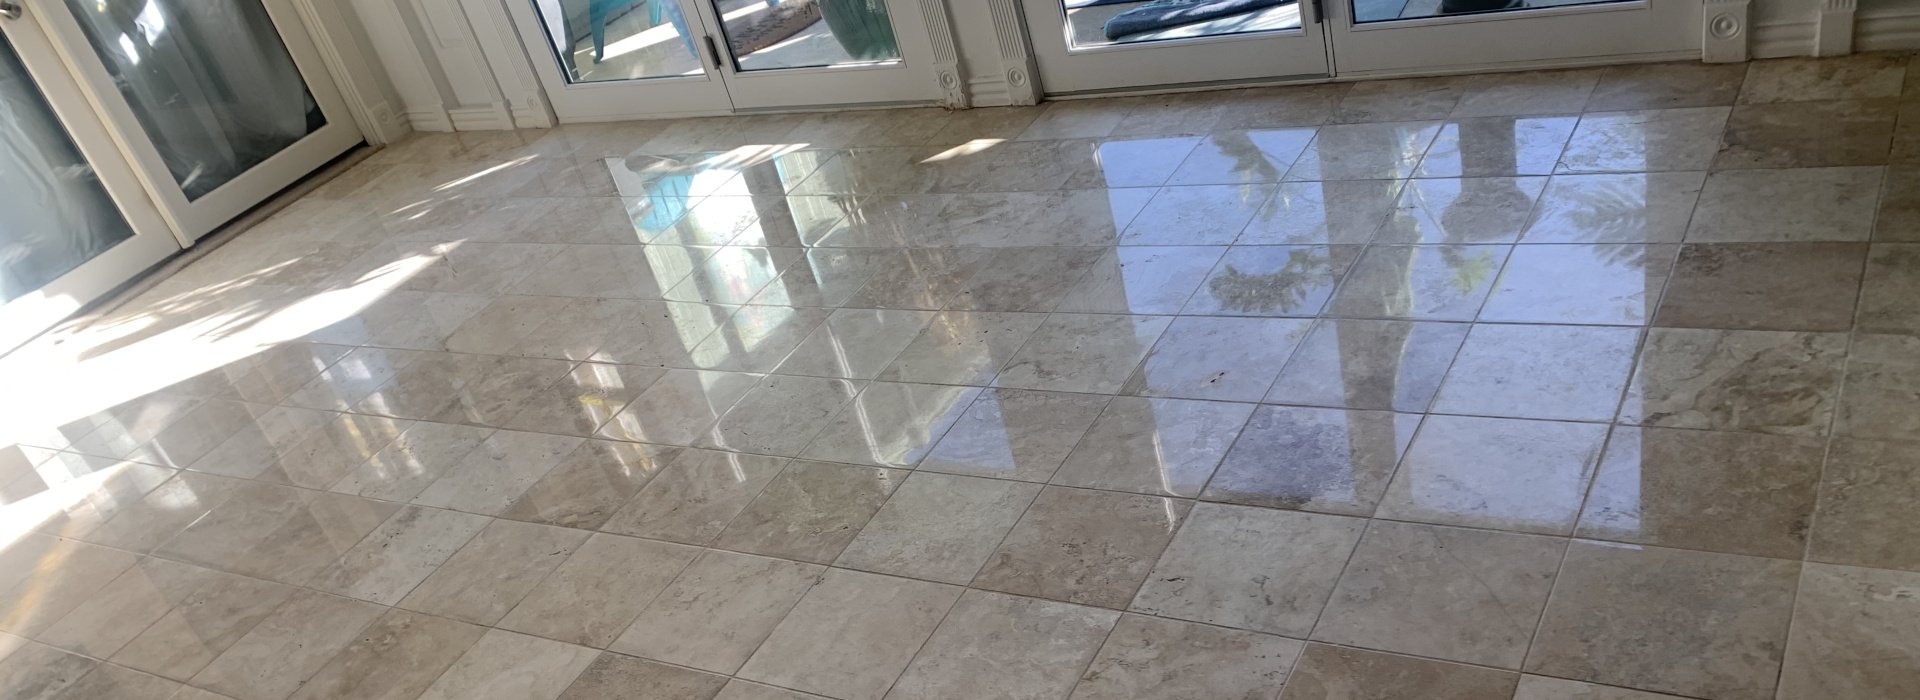 Travertine Cleaning & Polishing Services near Arlington TX: Get the Best Care for Your Floors